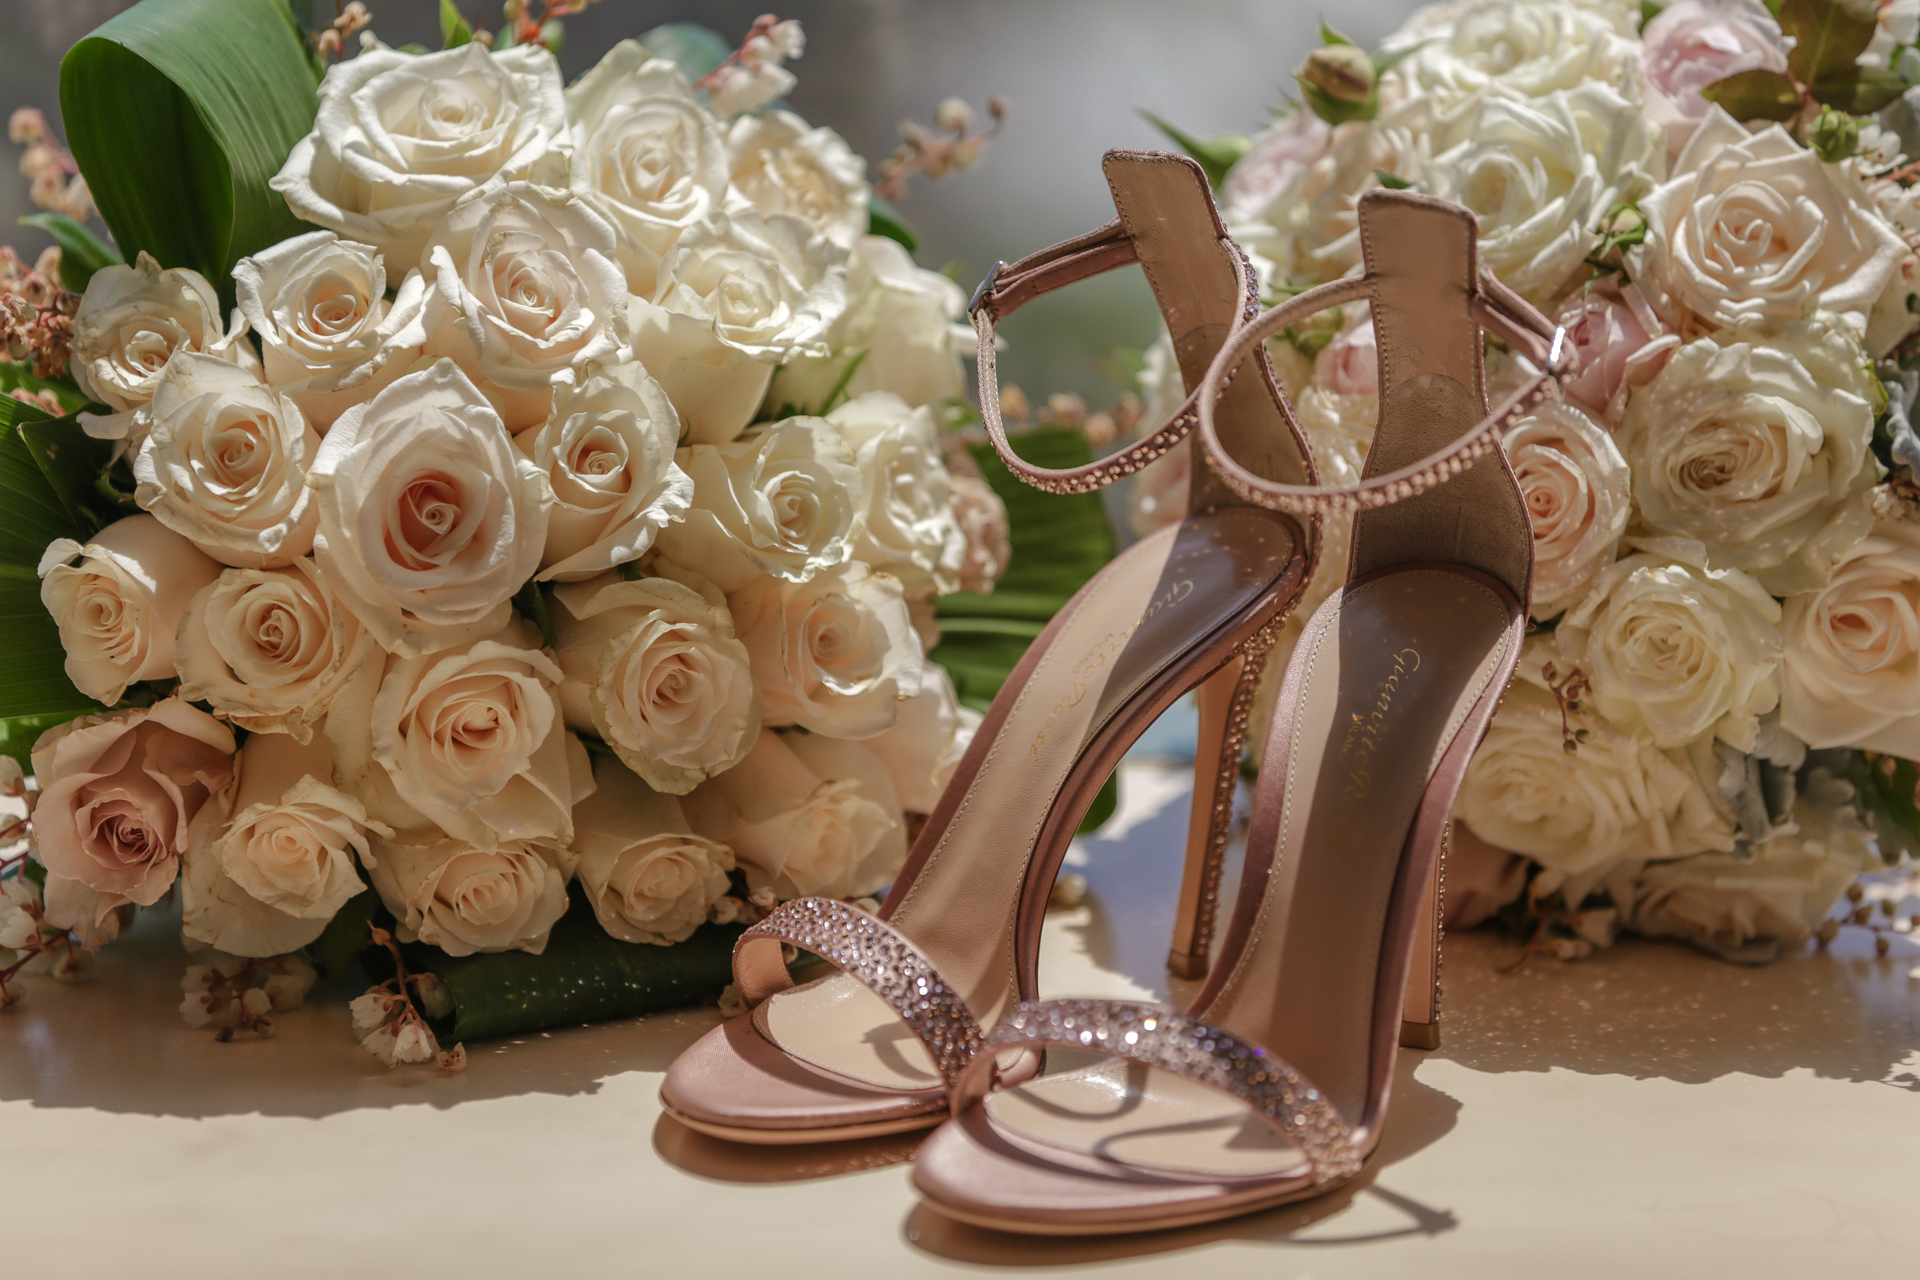 The brides wedding shoes | high heels